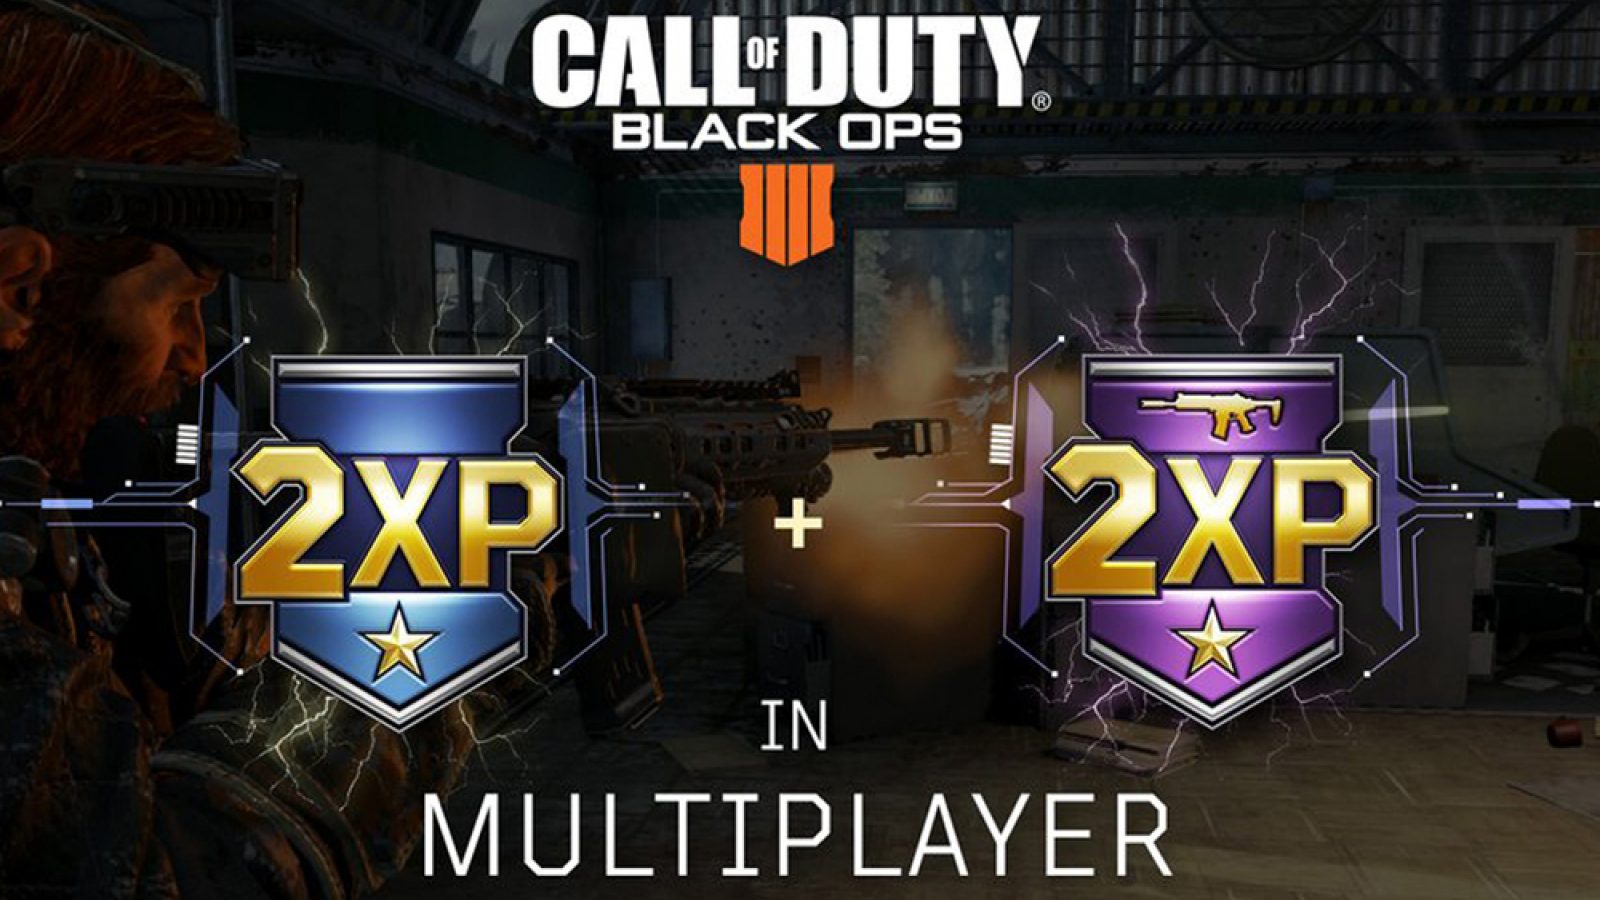 Call of Duty Black Ops 4 Double XP in Multiplayer Event Starts Today